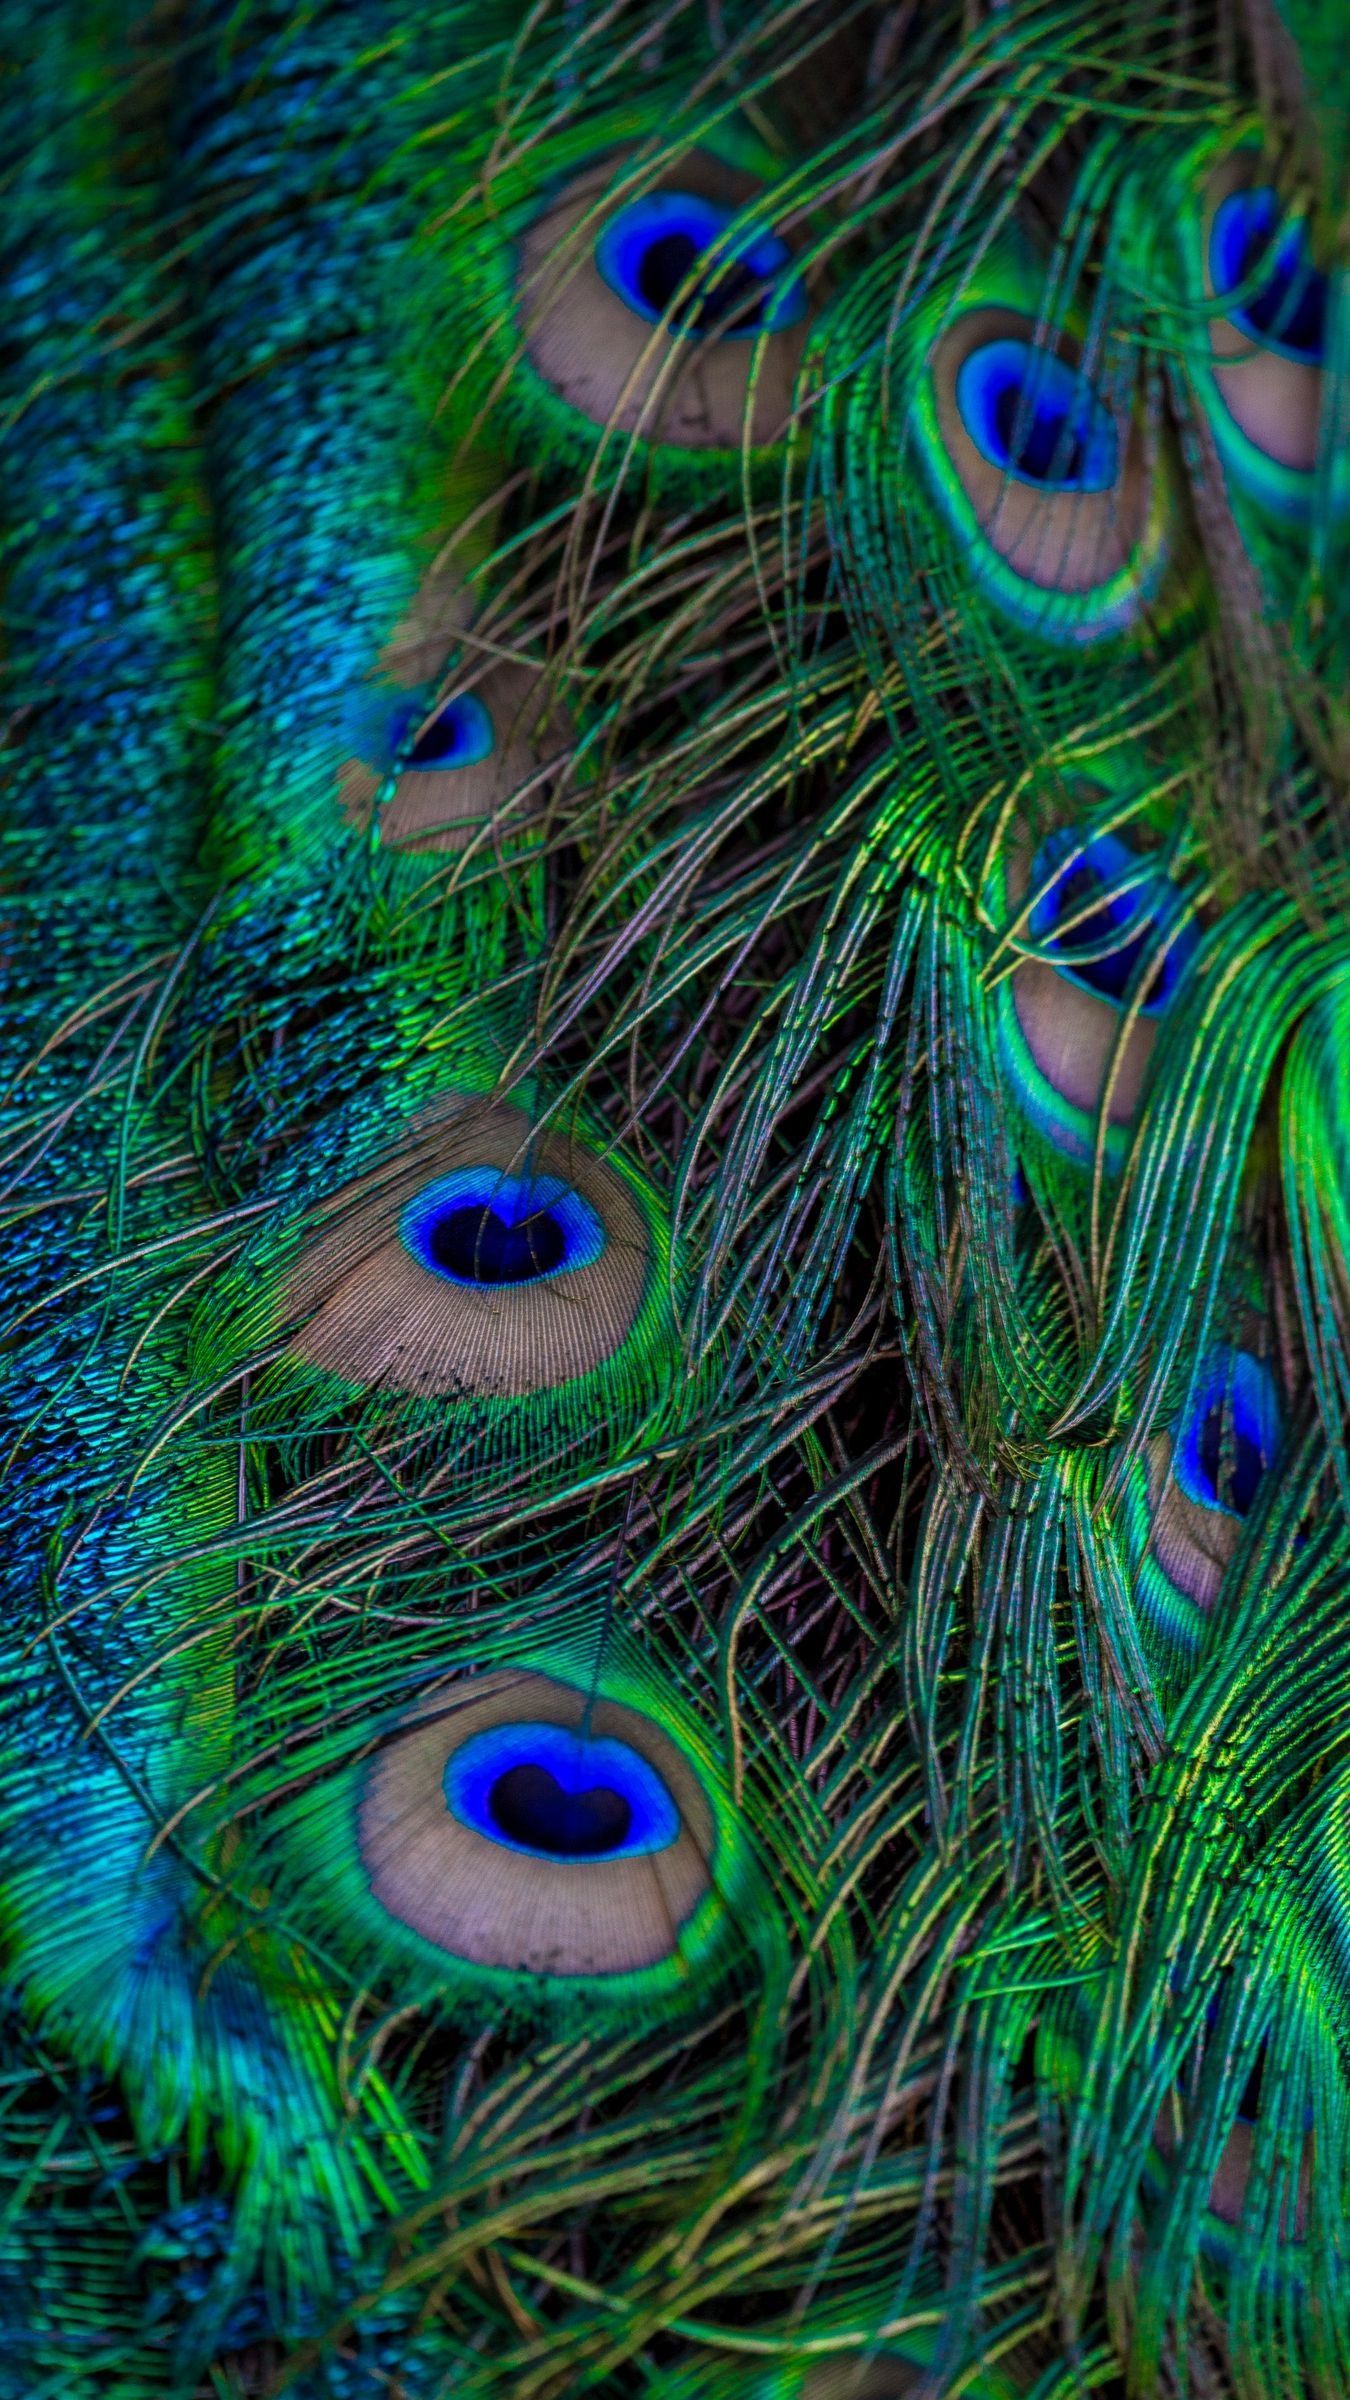 A close up of a peacock's feathers showing the blue and green colors. - Peacock